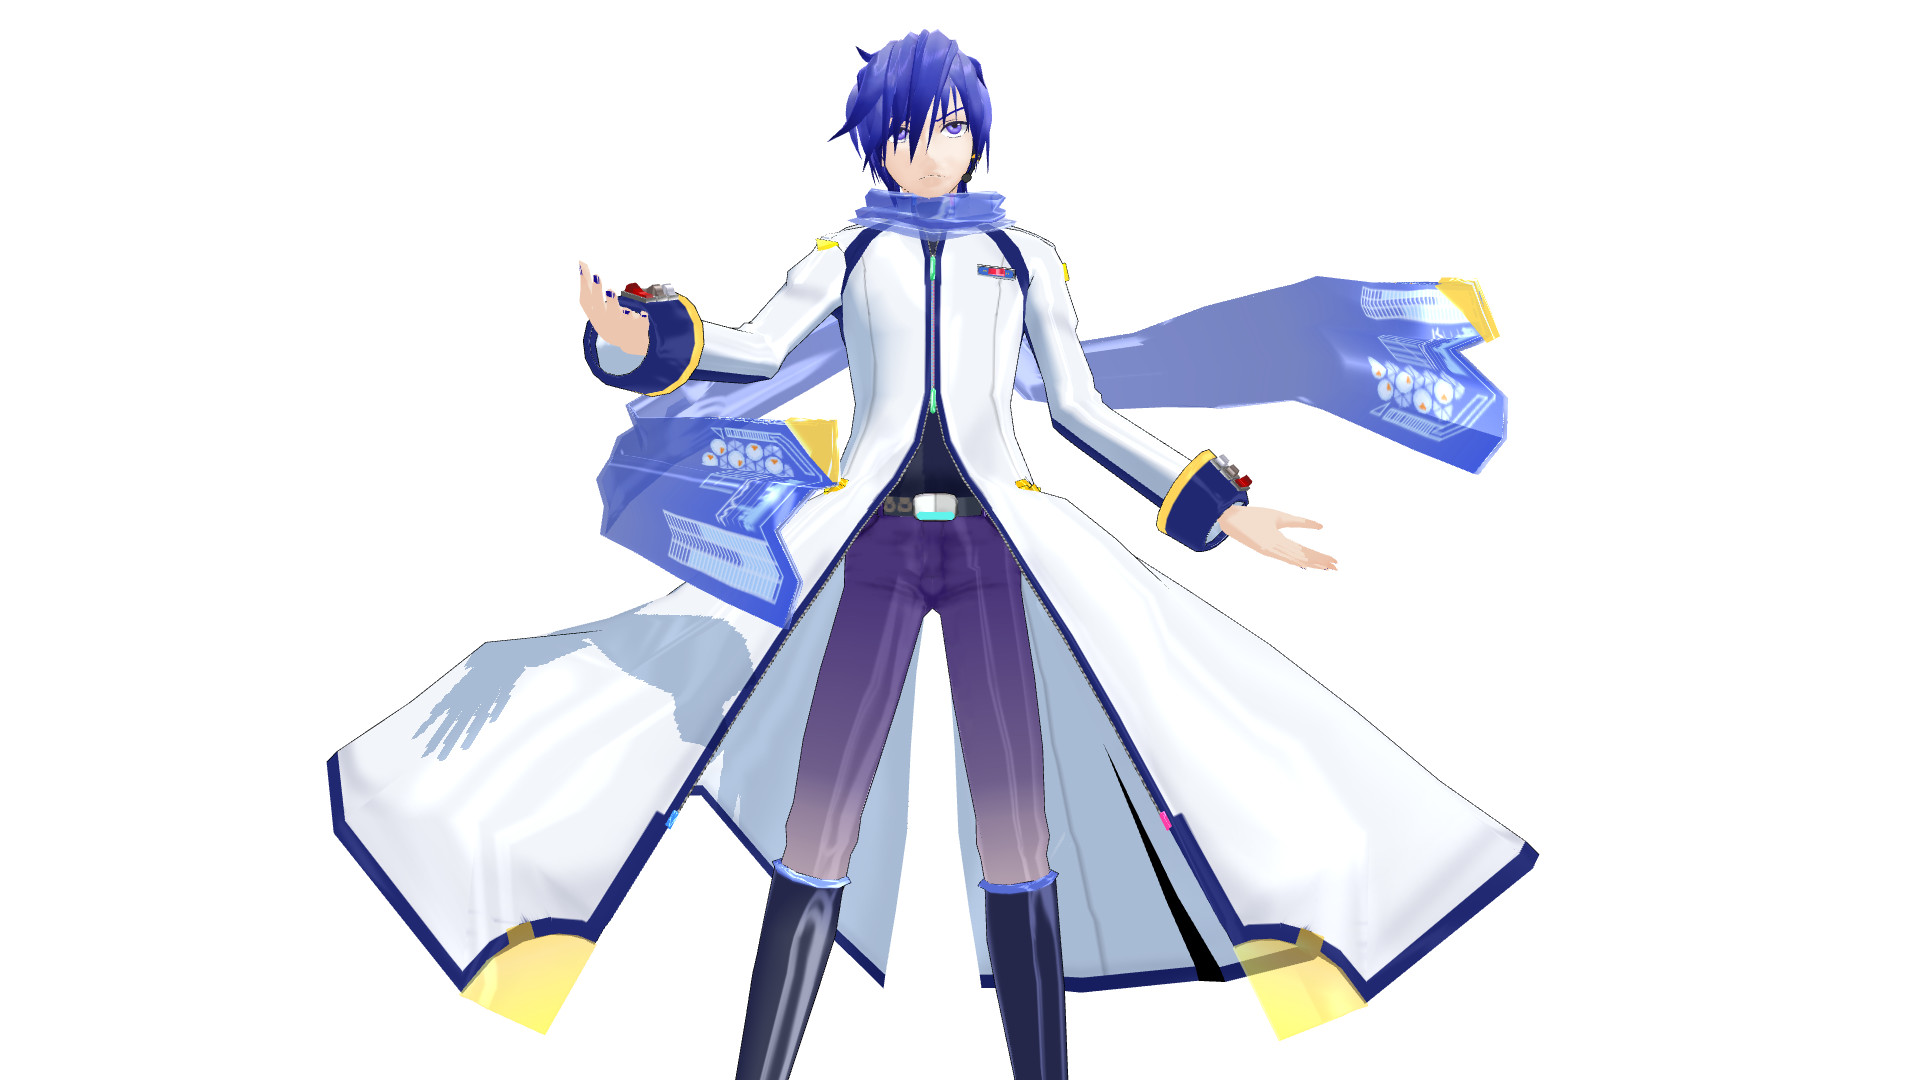 Kaito V3 Model Download Mmd By Reon046 On Deviantart